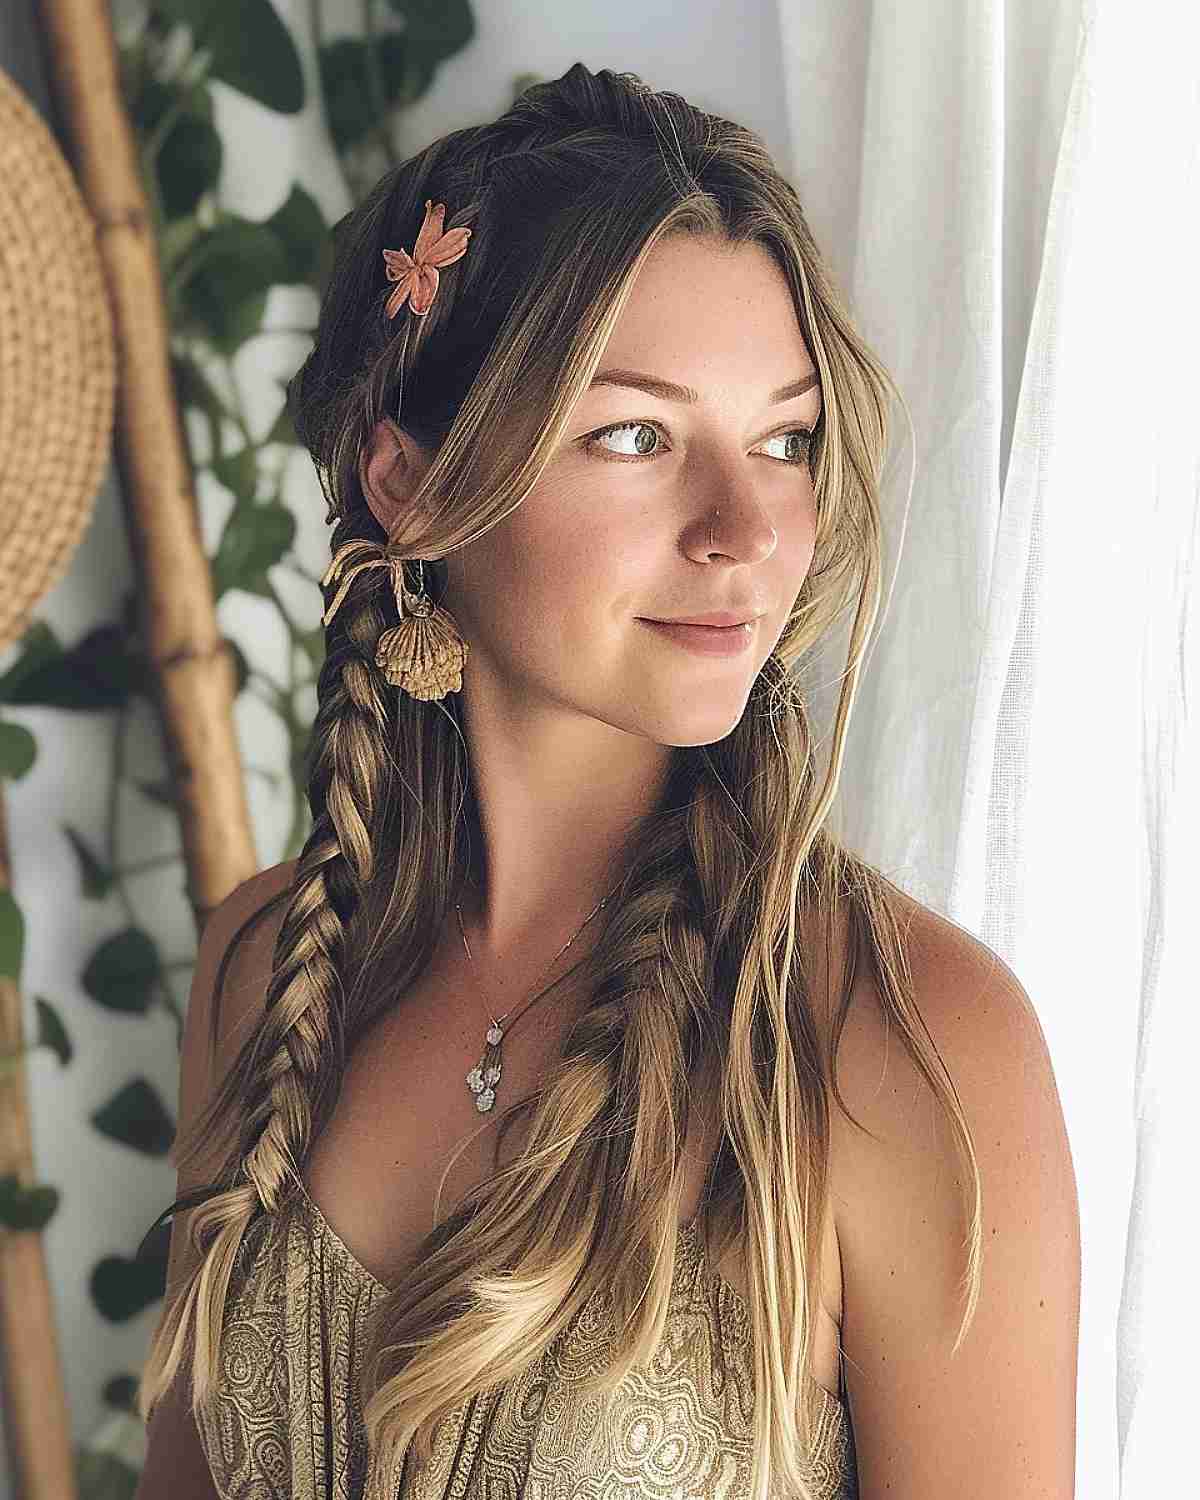 Mid-30s woman with boho-inspired fishtail braids and a floral hair accessory